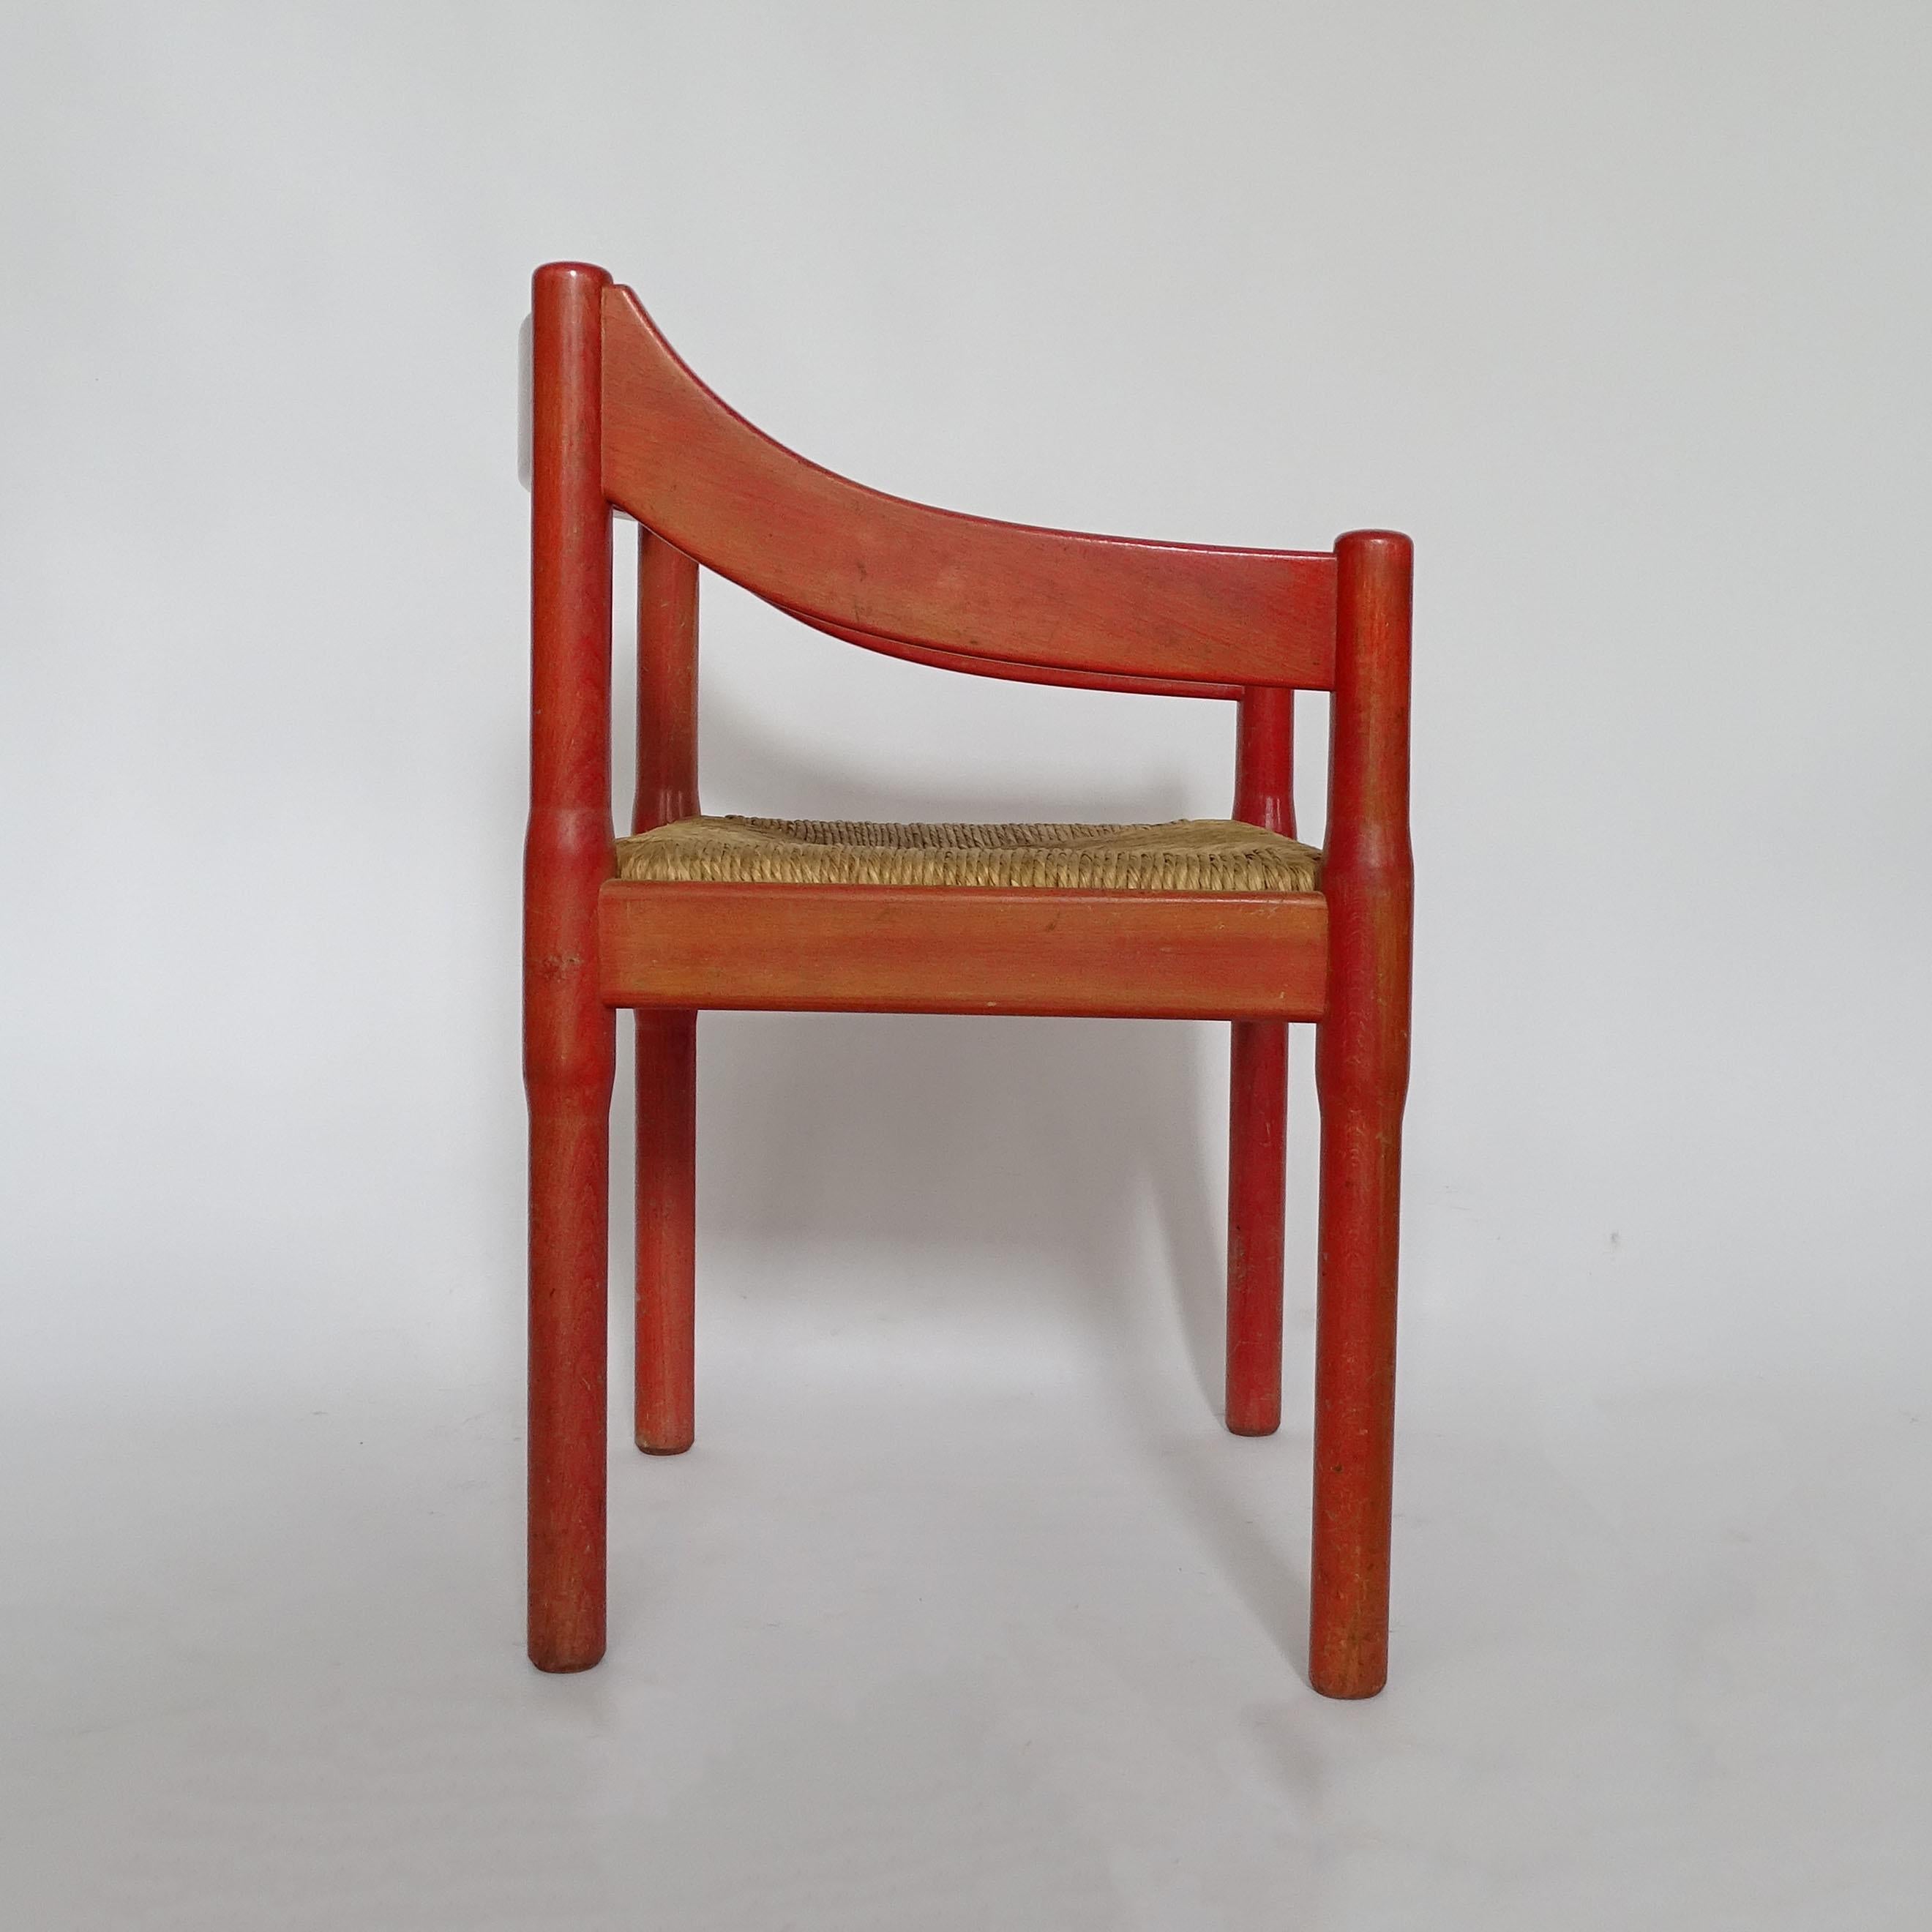 Mid-20th Century Vico Magistretti Pair of Red Carimate Armchairs for Cassina, Italy, 1961 For Sale